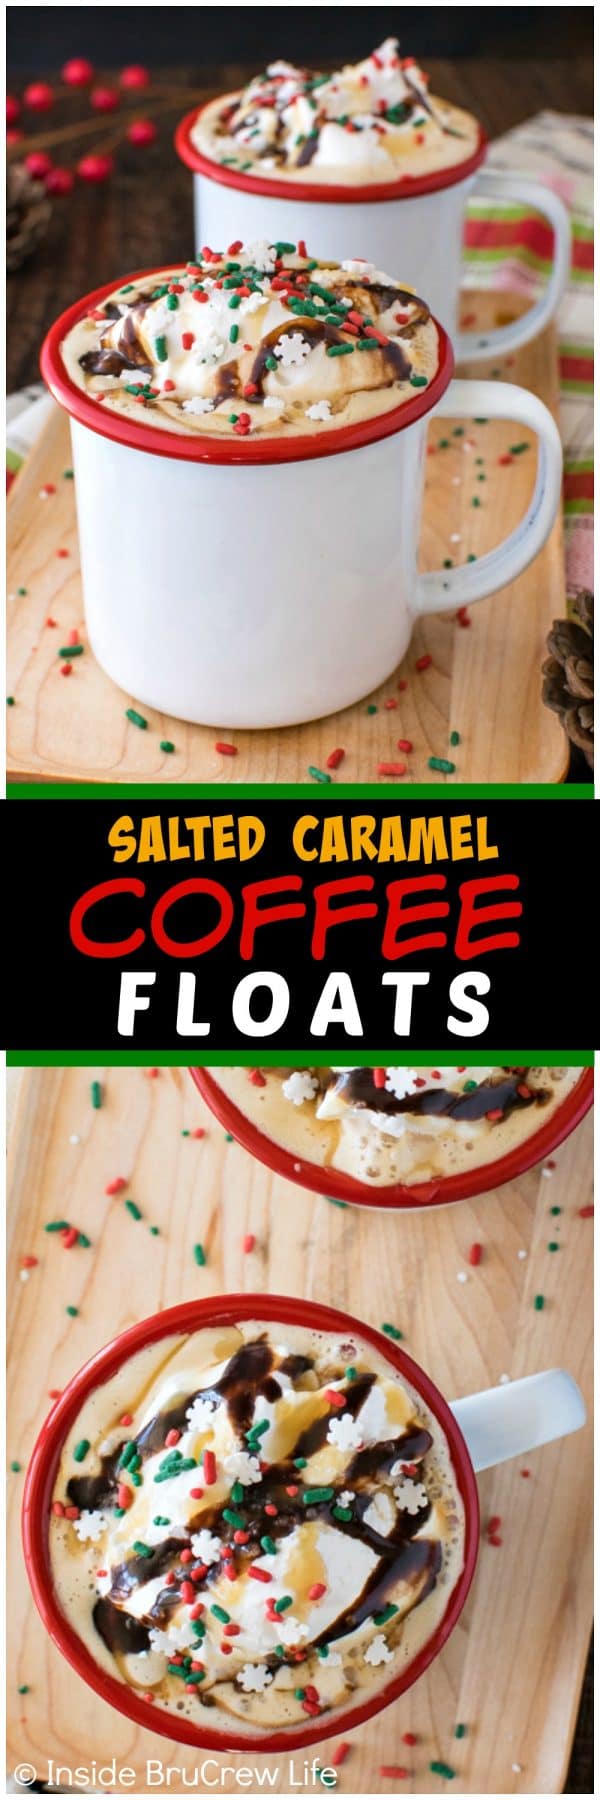 Salted Caramel Coffee Floats - coffee and gelato mixed together in a mug creates a delicious and easy coffee house drink. Great at home date night dessert recipe!